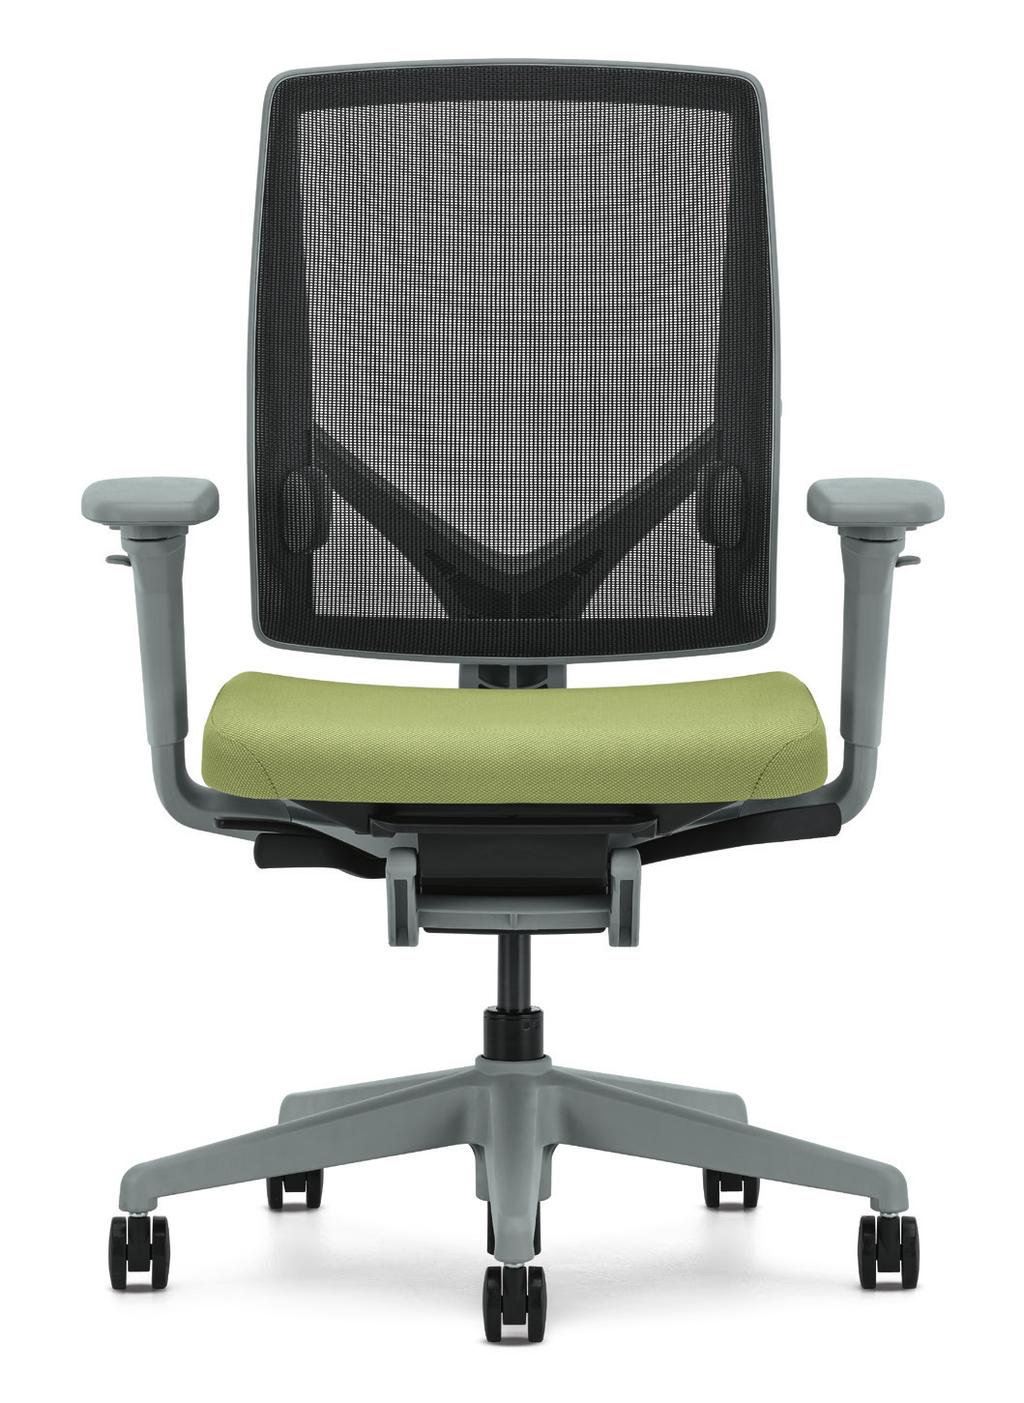 Seating Models Upholstered back work chair with adjustable arms and without arms. Mesh back work chair with adjustable arms.